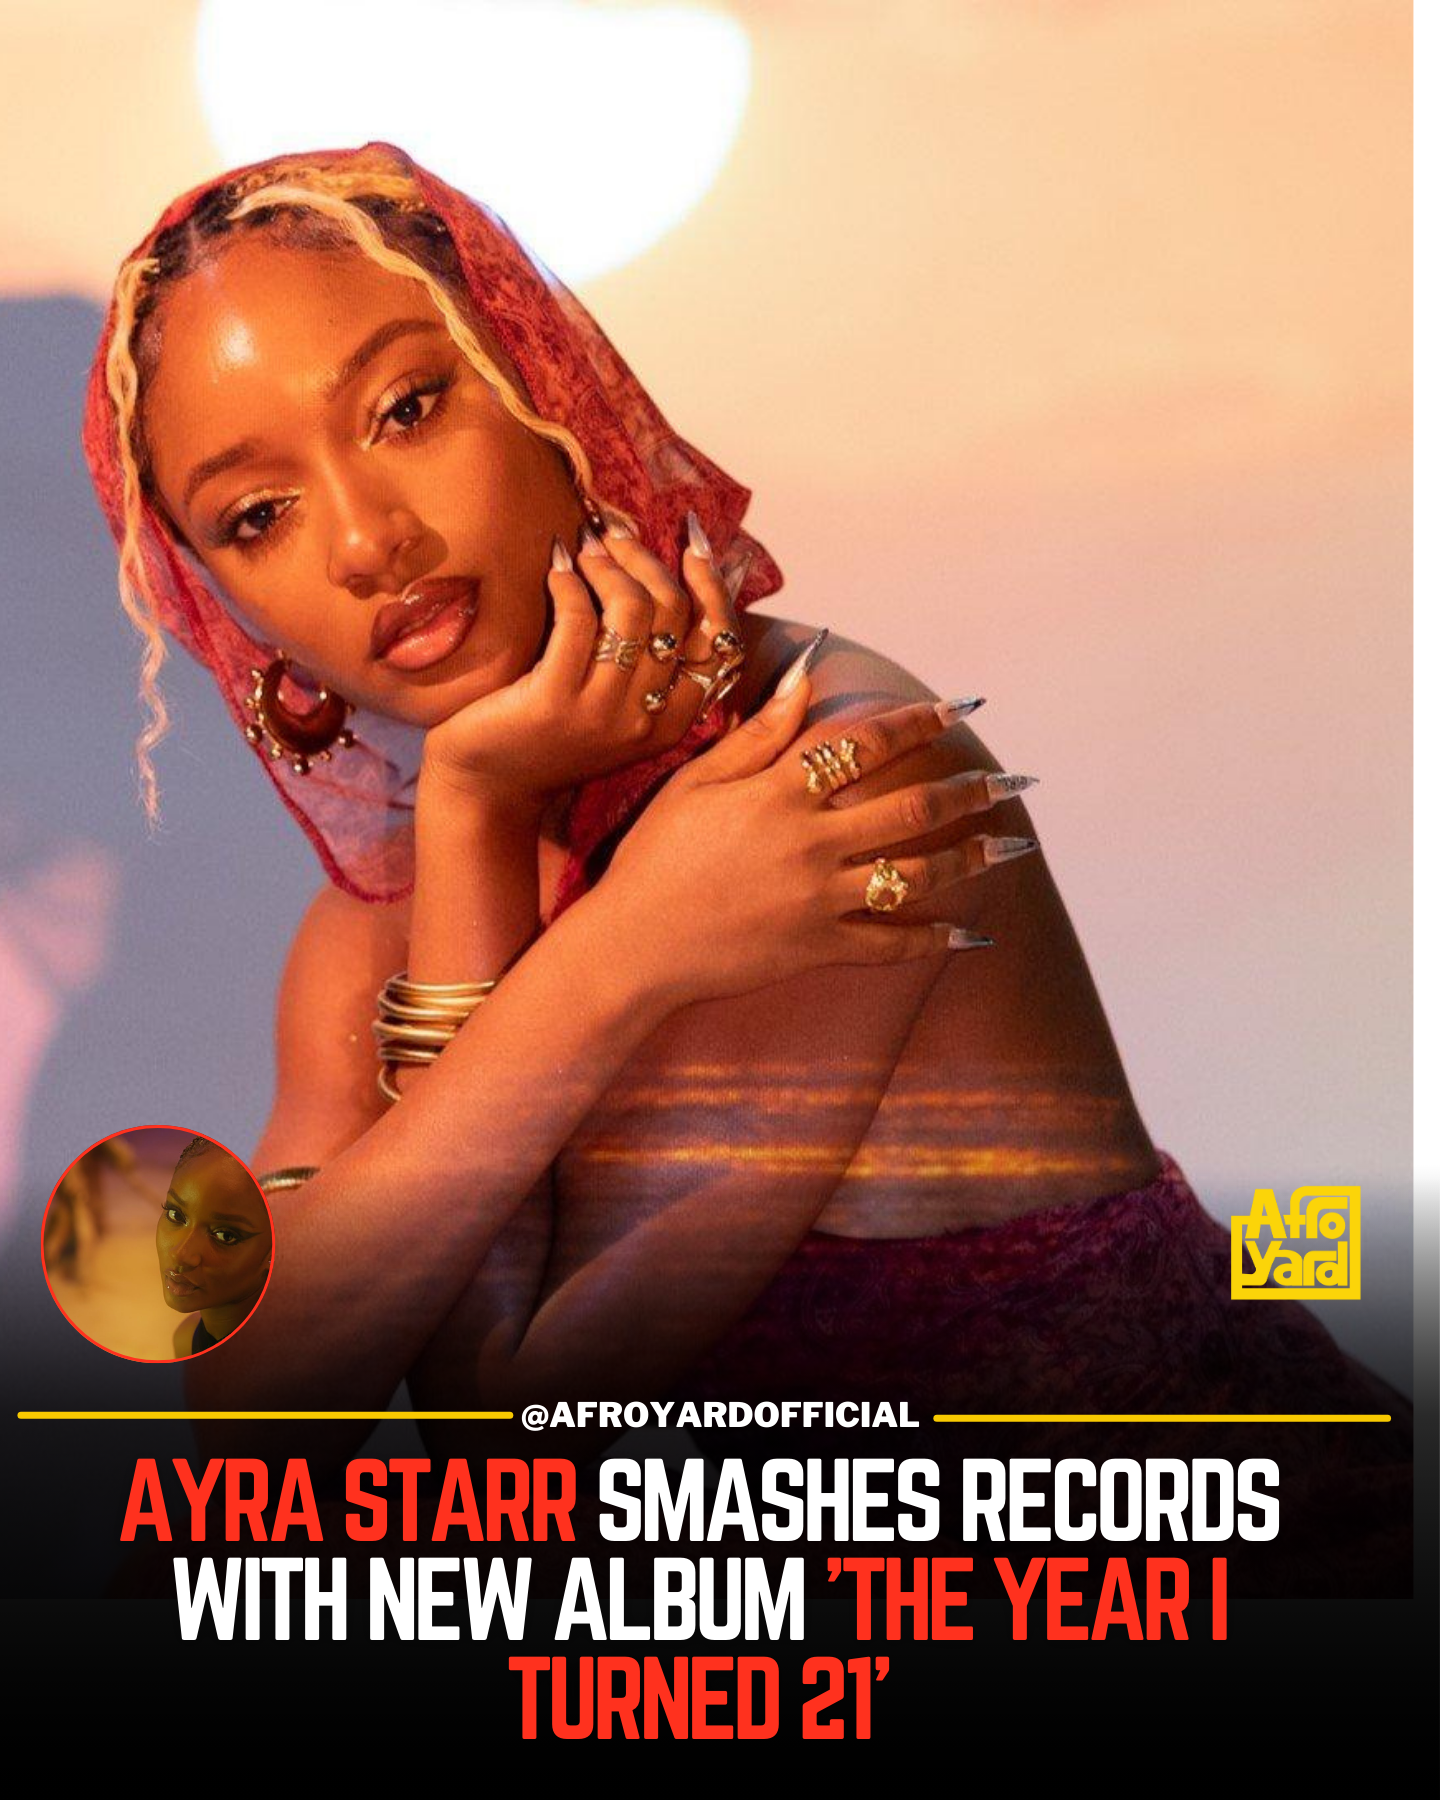 Ayra Starr Smashes Records with New Album ‘The Year I Turned 21’